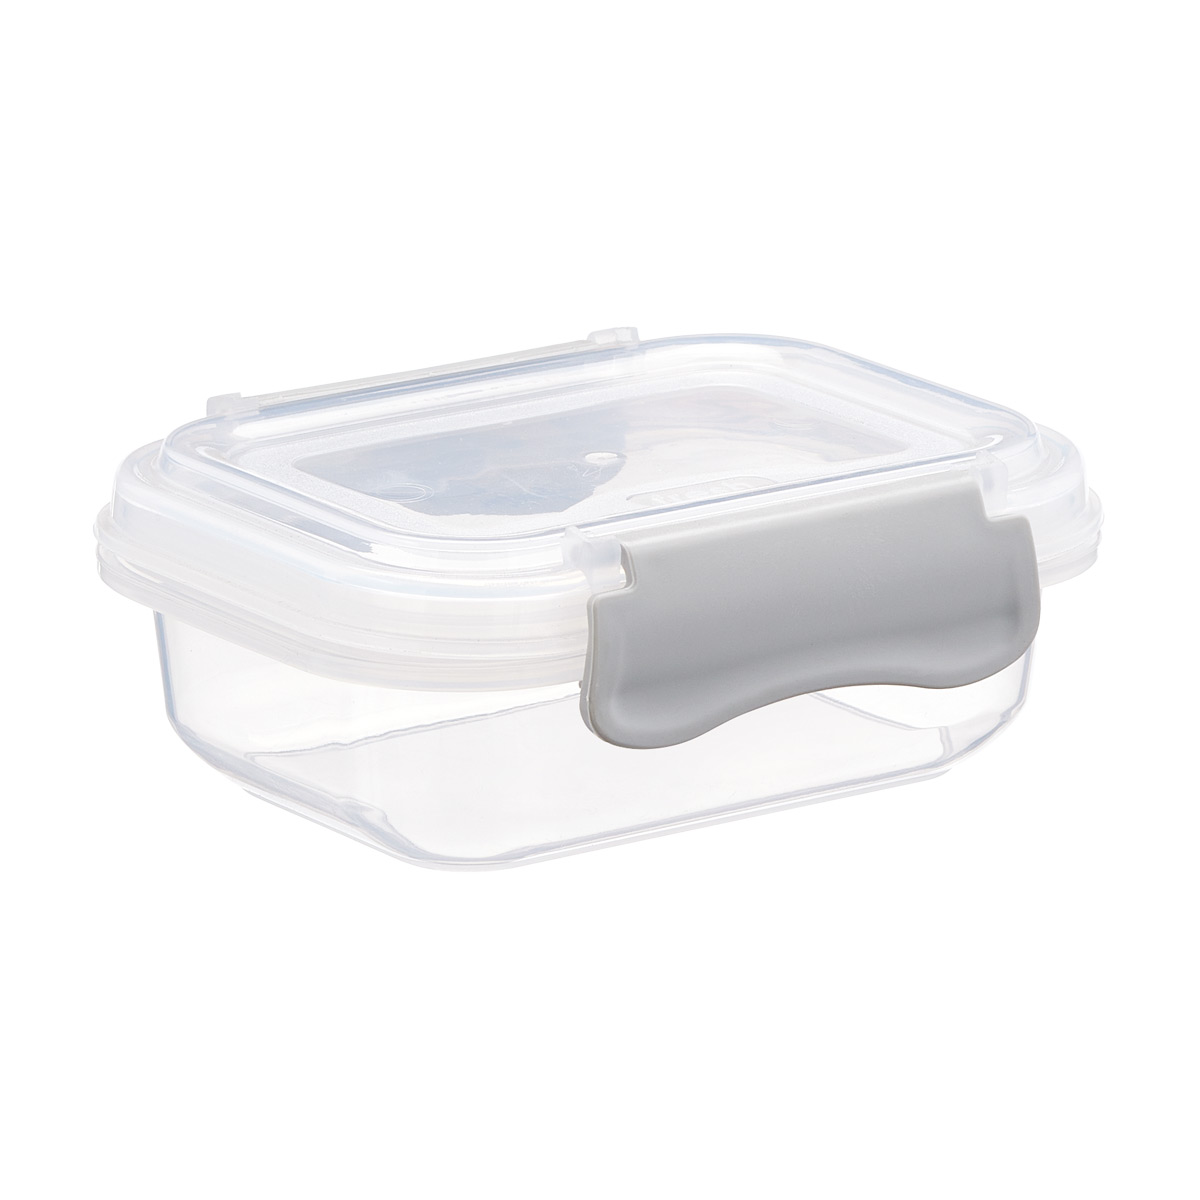 Plastic Food Containers with Grey Clips | The Container Store